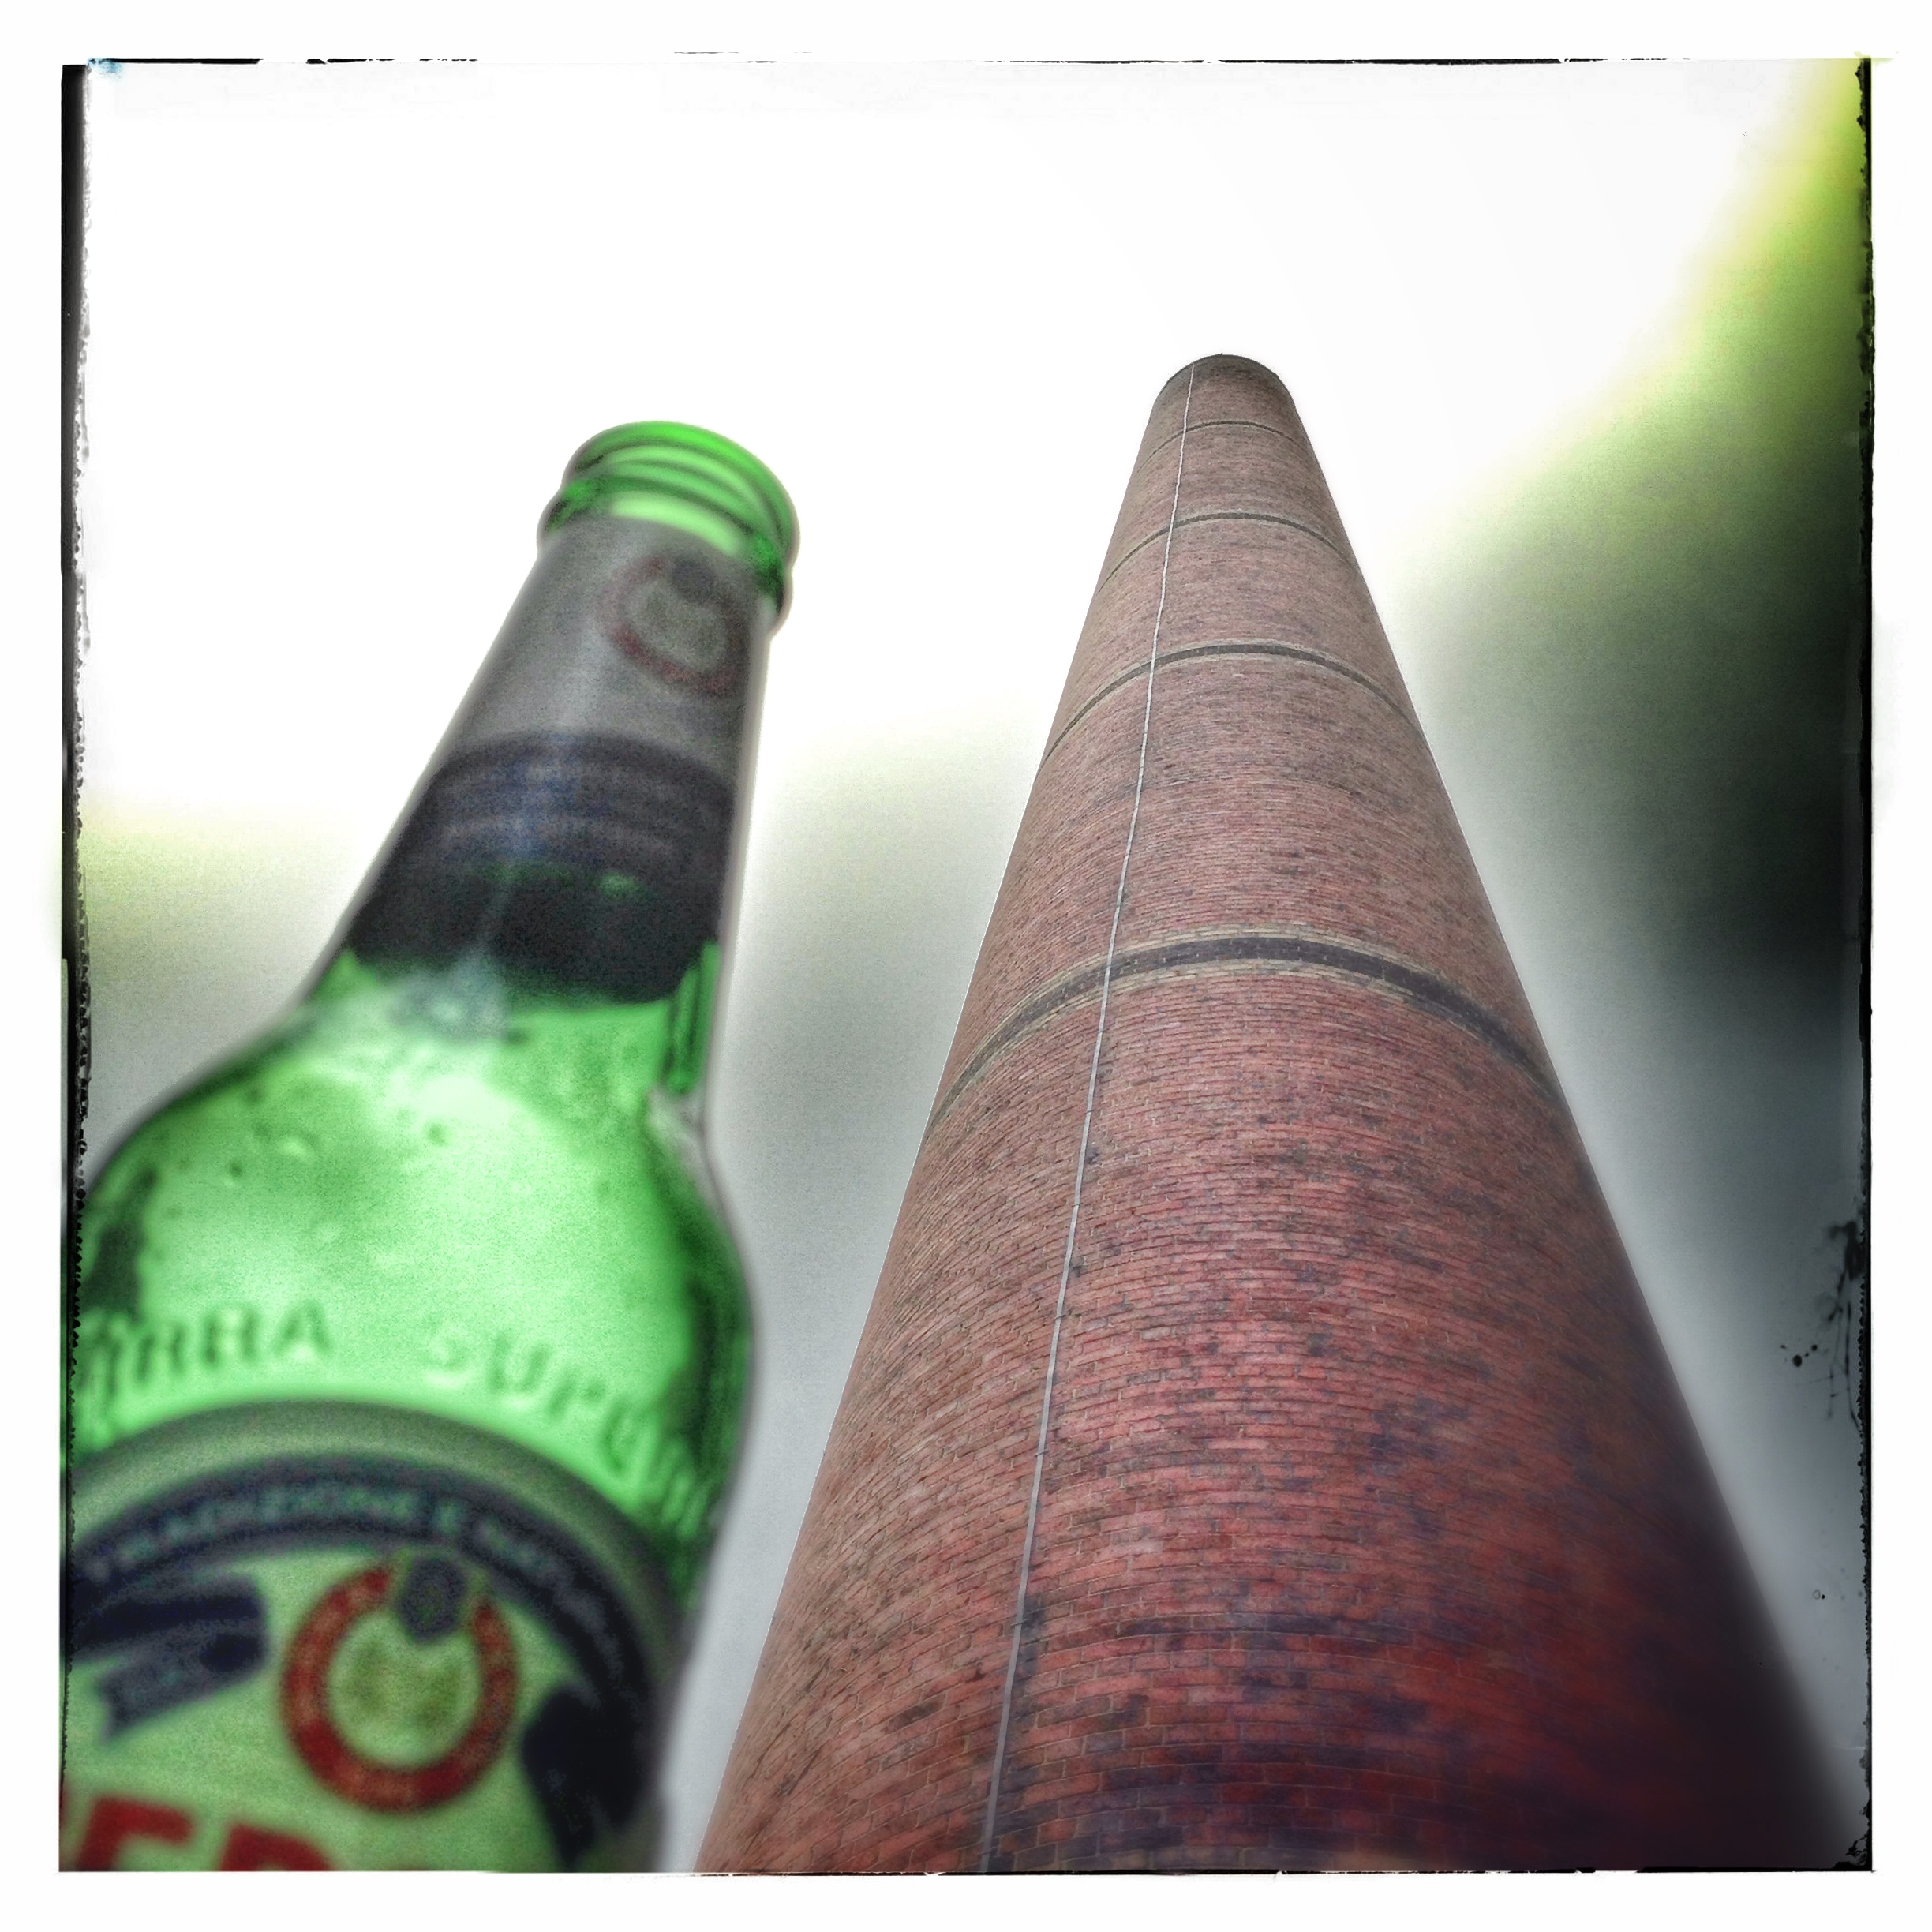 Day 965. Beer Tower